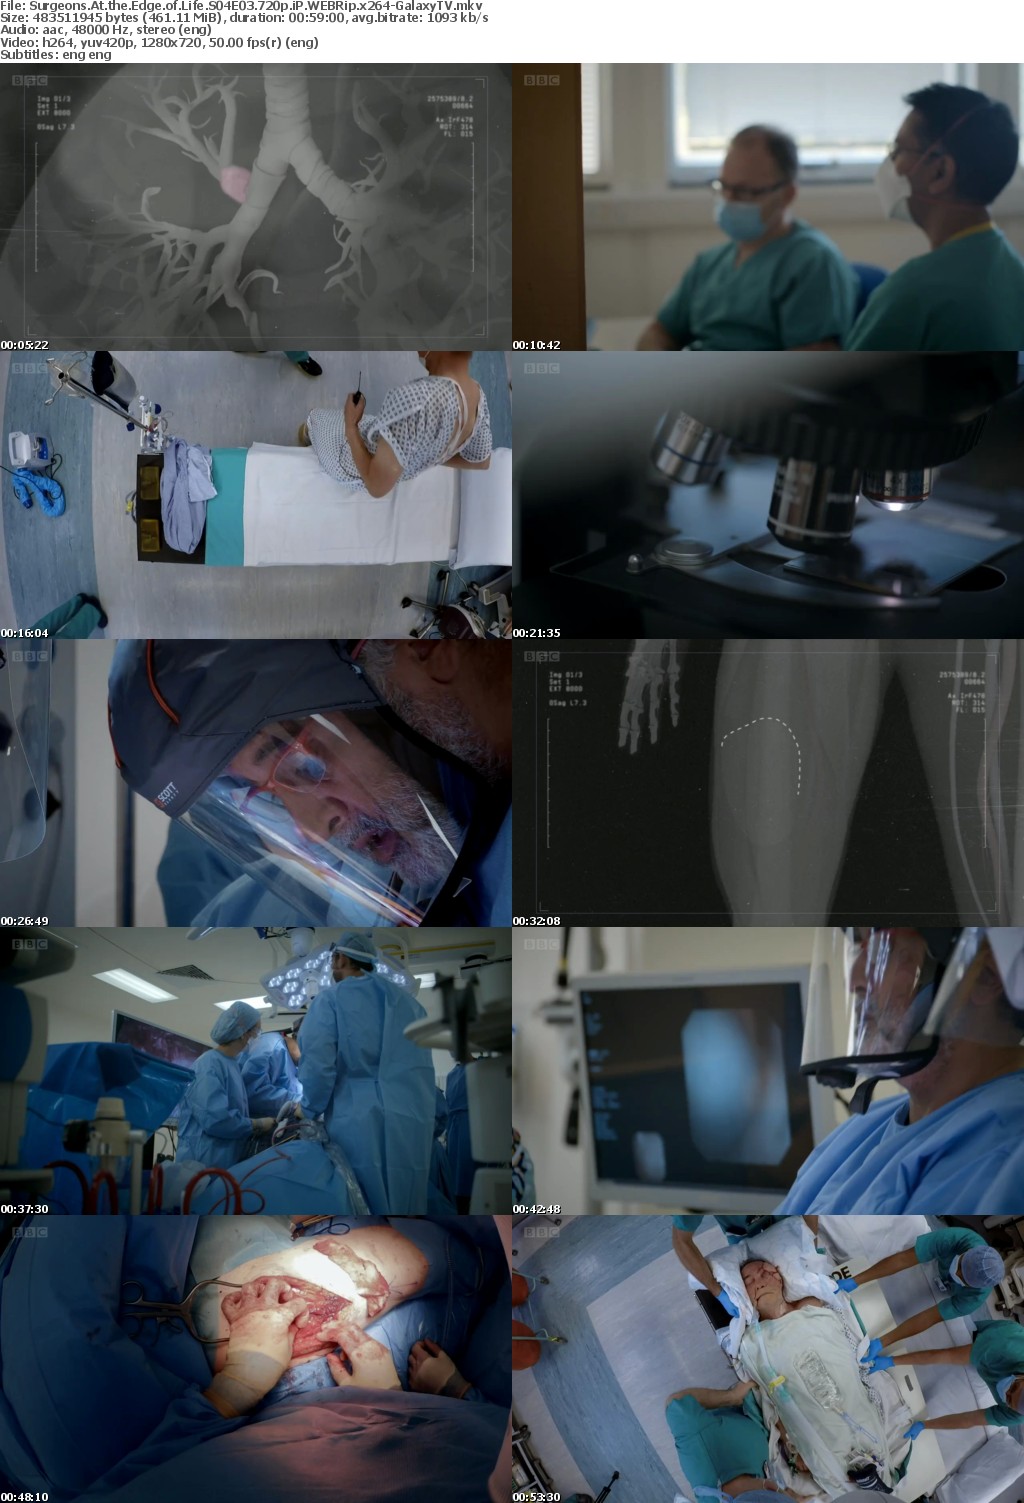 Surgeons At The Edge Of Life S04 COMPLETE 720p iP WEBRip x264-GalaxyTV